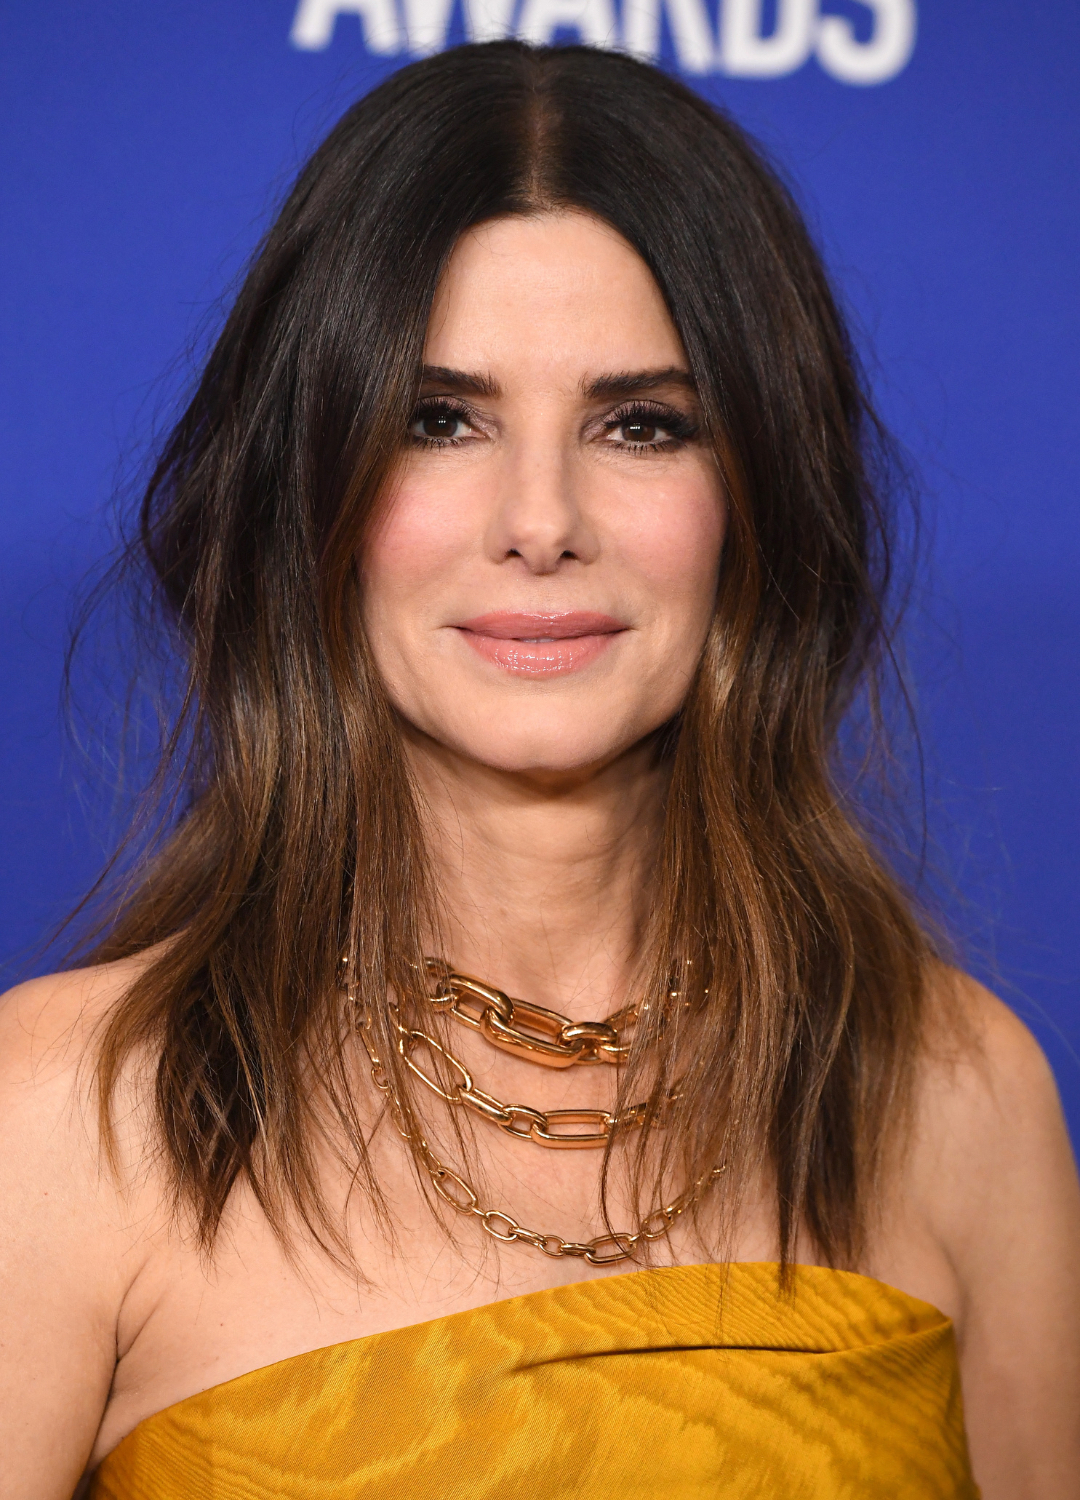 Sandra Bullock poses in the press room at the 77th Annual Golden Globe Awards at The Beverly Hilton Hotel on January 05, 2020 in Beverly Hills, California